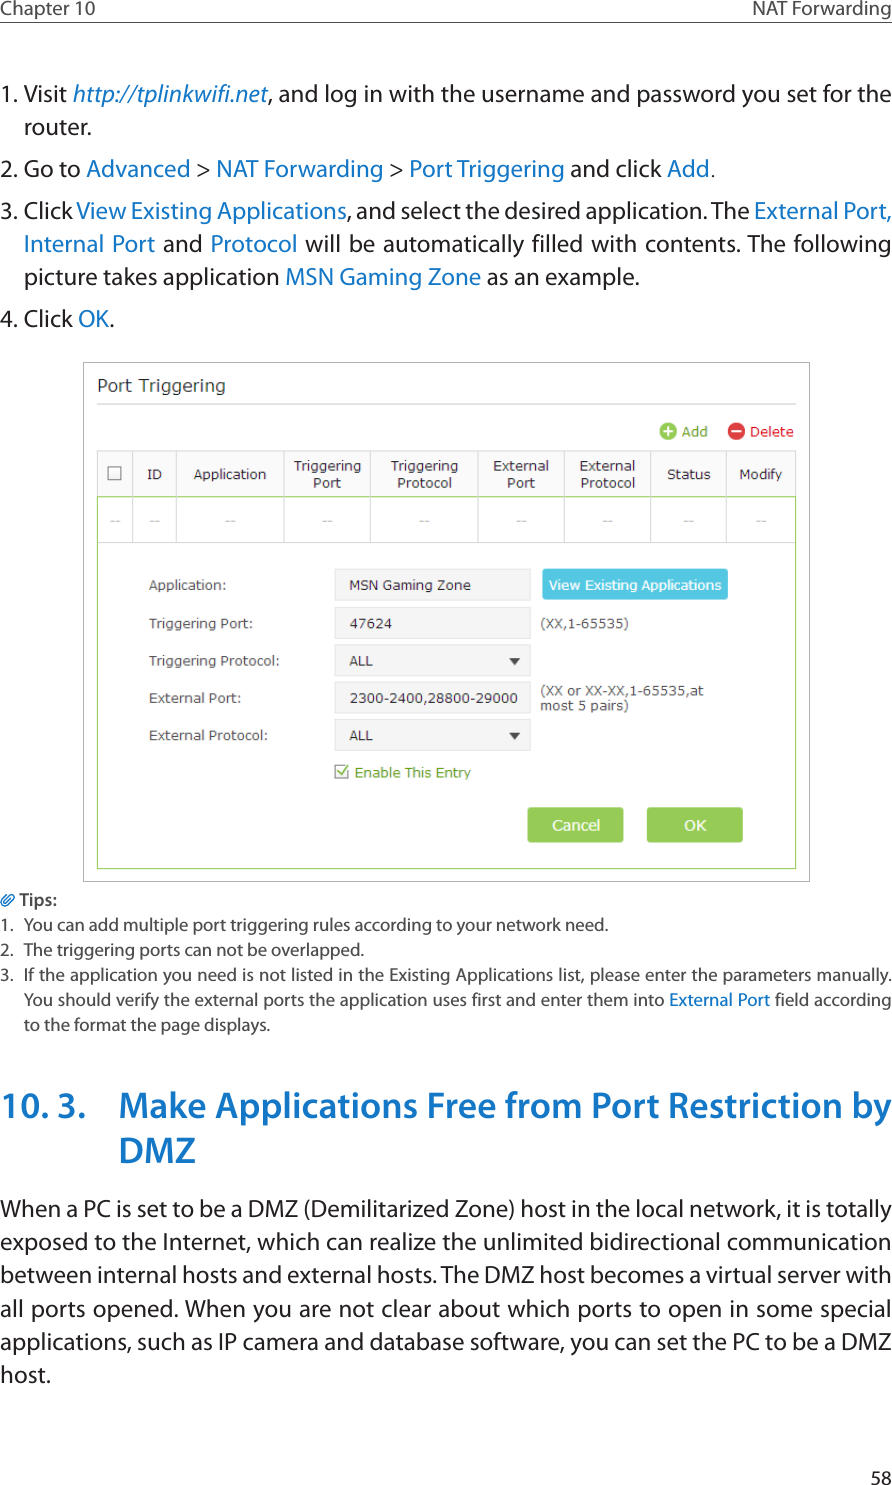 58Chapter 10 NAT Forwarding1. Visit http://tplinkwifi.net, and log in with the username and password you set for the router.2. Go to Advanced &gt; NAT Forwarding &gt; Port Triggering and click Add.3. Click View Existing Applications, and select the desired application. The External Port, Internal Port and Protocol will be automatically filled with contents. The following picture takes application MSN Gaming Zone as an example.4. Click OK.Tips:1.  You can add multiple port triggering rules according to your network need.2.  The triggering ports can not be overlapped.3.  If the application you need is not listed in the Existing Applications list, please enter the parameters manually. You should verify the external ports the application uses first and enter them into External Port field according to the format the page displays.10. 3.  Make Applications Free from Port Restriction by DMZWhen a PC is set to be a DMZ (Demilitarized Zone) host in the local network, it is totally exposed to the Internet, which can realize the unlimited bidirectional communication between internal hosts and external hosts. The DMZ host becomes a virtual server with all ports opened. When you are not clear about which ports to open in some special applications, such as IP camera and database software, you can set the PC to be a DMZ host.